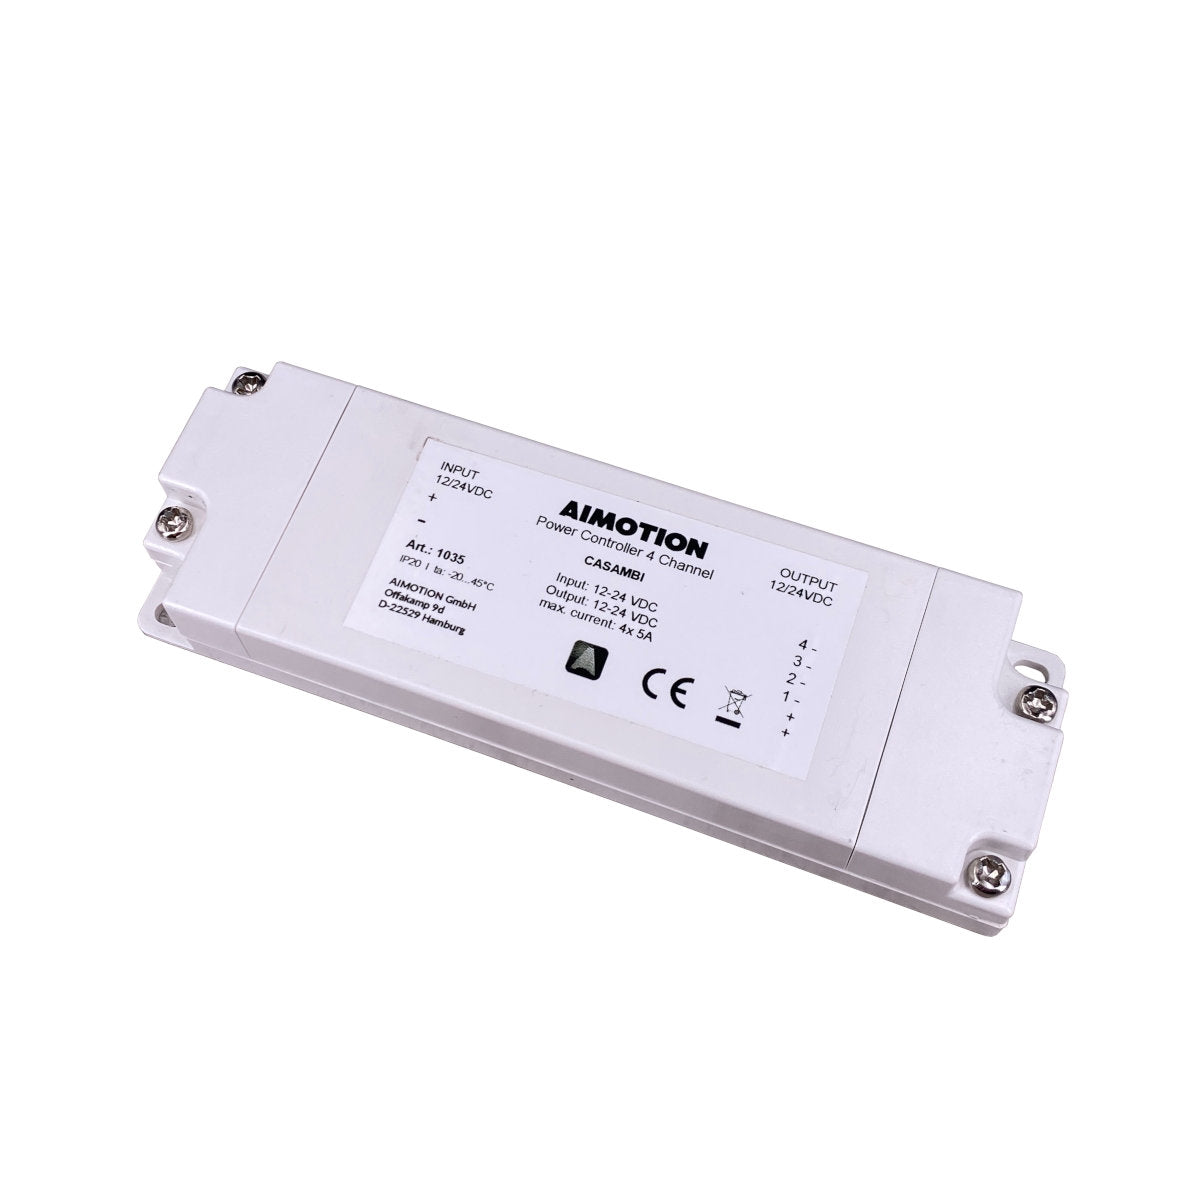 High Power 4-Channel LED Dimmer and RGBW Controller